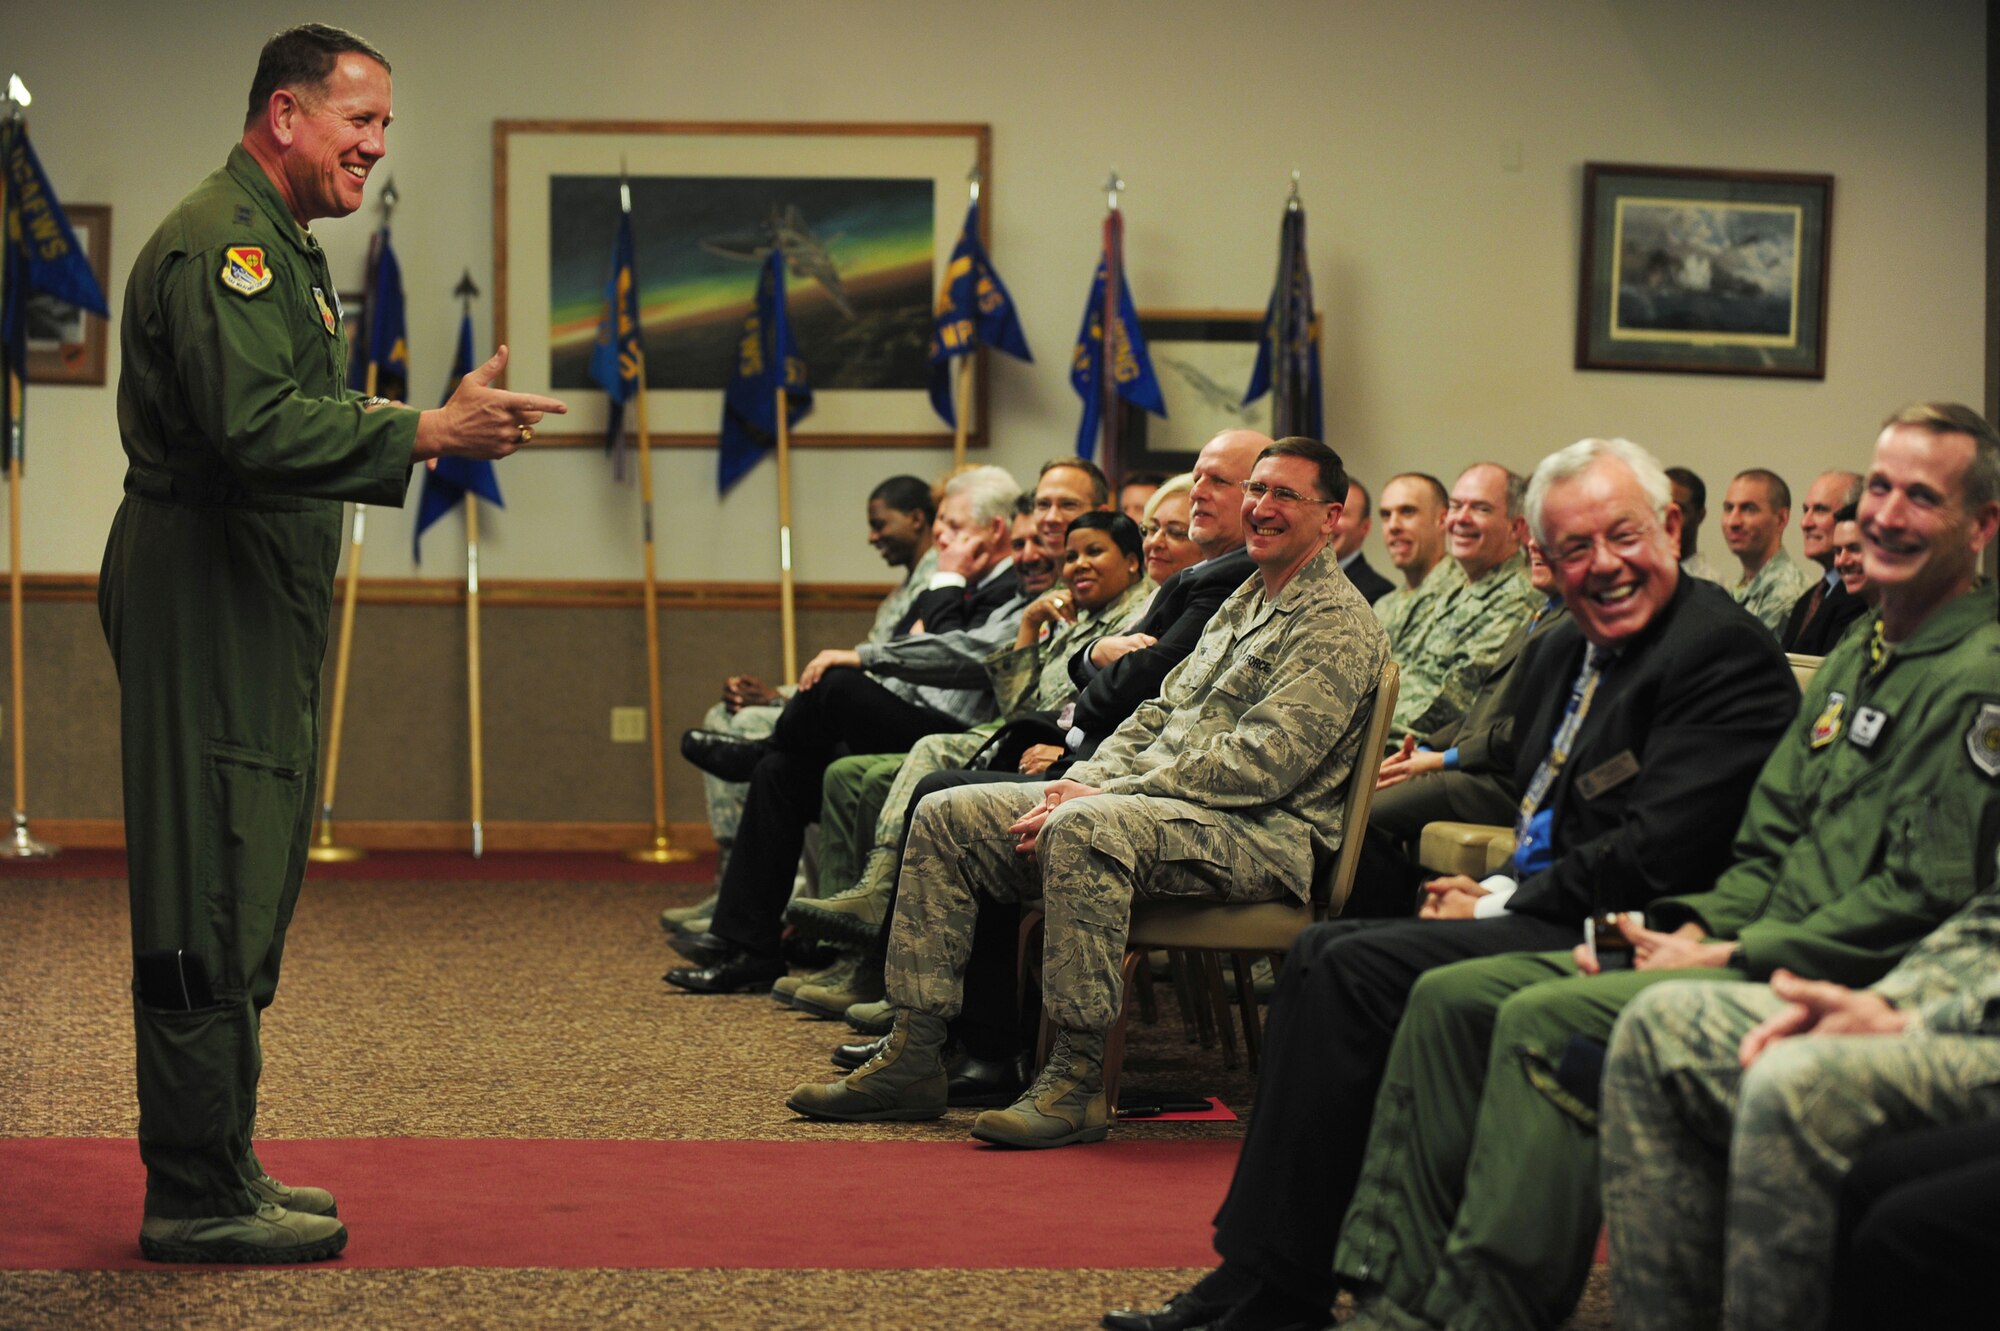 U.S. Air Force Maj. Gen. James Hyatt, U.S. Air Force Warfare Center commander, shares a laugh with members of the Nellis Support Team and new honorary commanders during a commander's call at Nellis Air Force Base, March 9, 2012.  Maj. Gen. Hyatt expanded on upcoming and current projects affecting the Nellis and Las Vegas community and answered questions from attendees.  (U.S. Air Force photo by Staff Sgt. William P.Coleman)